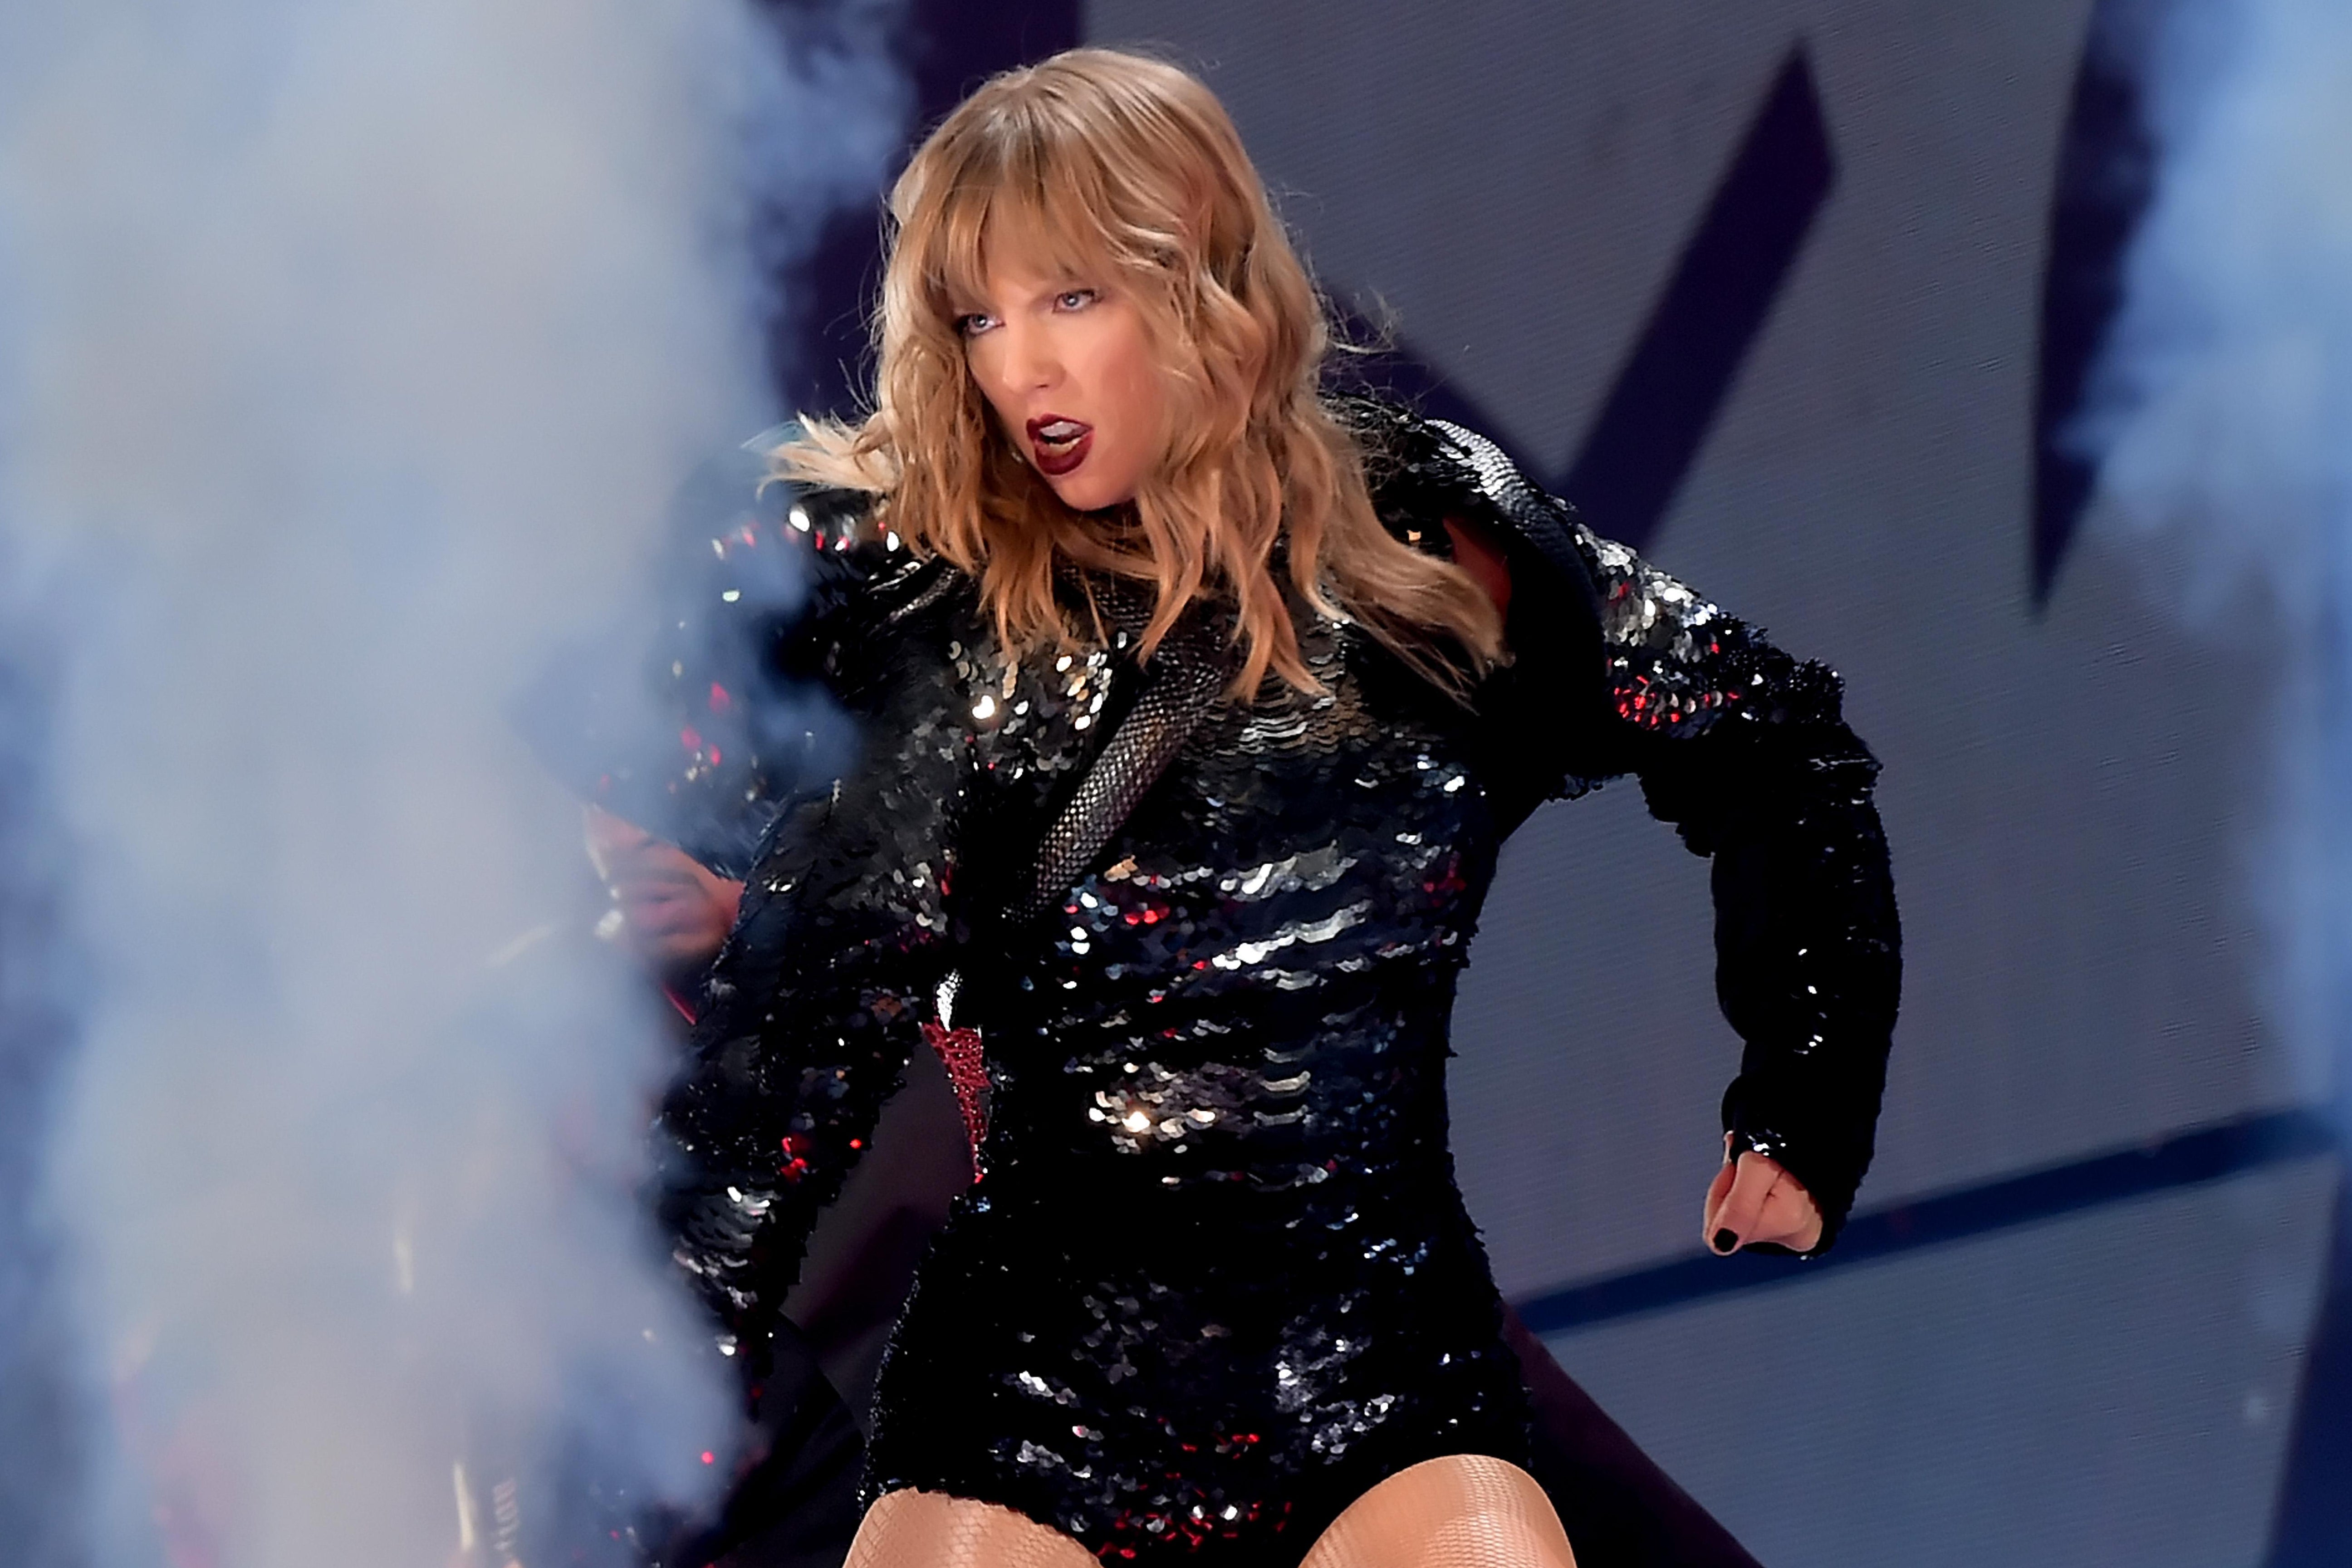 GLENDALE, AZ - MAY 08:  Taylor Swift performs onstage during opening night of her 2018 Reputation Stadium Tour at University of Phoenix Stadium on May 8, 2018 in Glendale, Arizona.  (Photo by Kevin Winter/Getty Images for TAS)